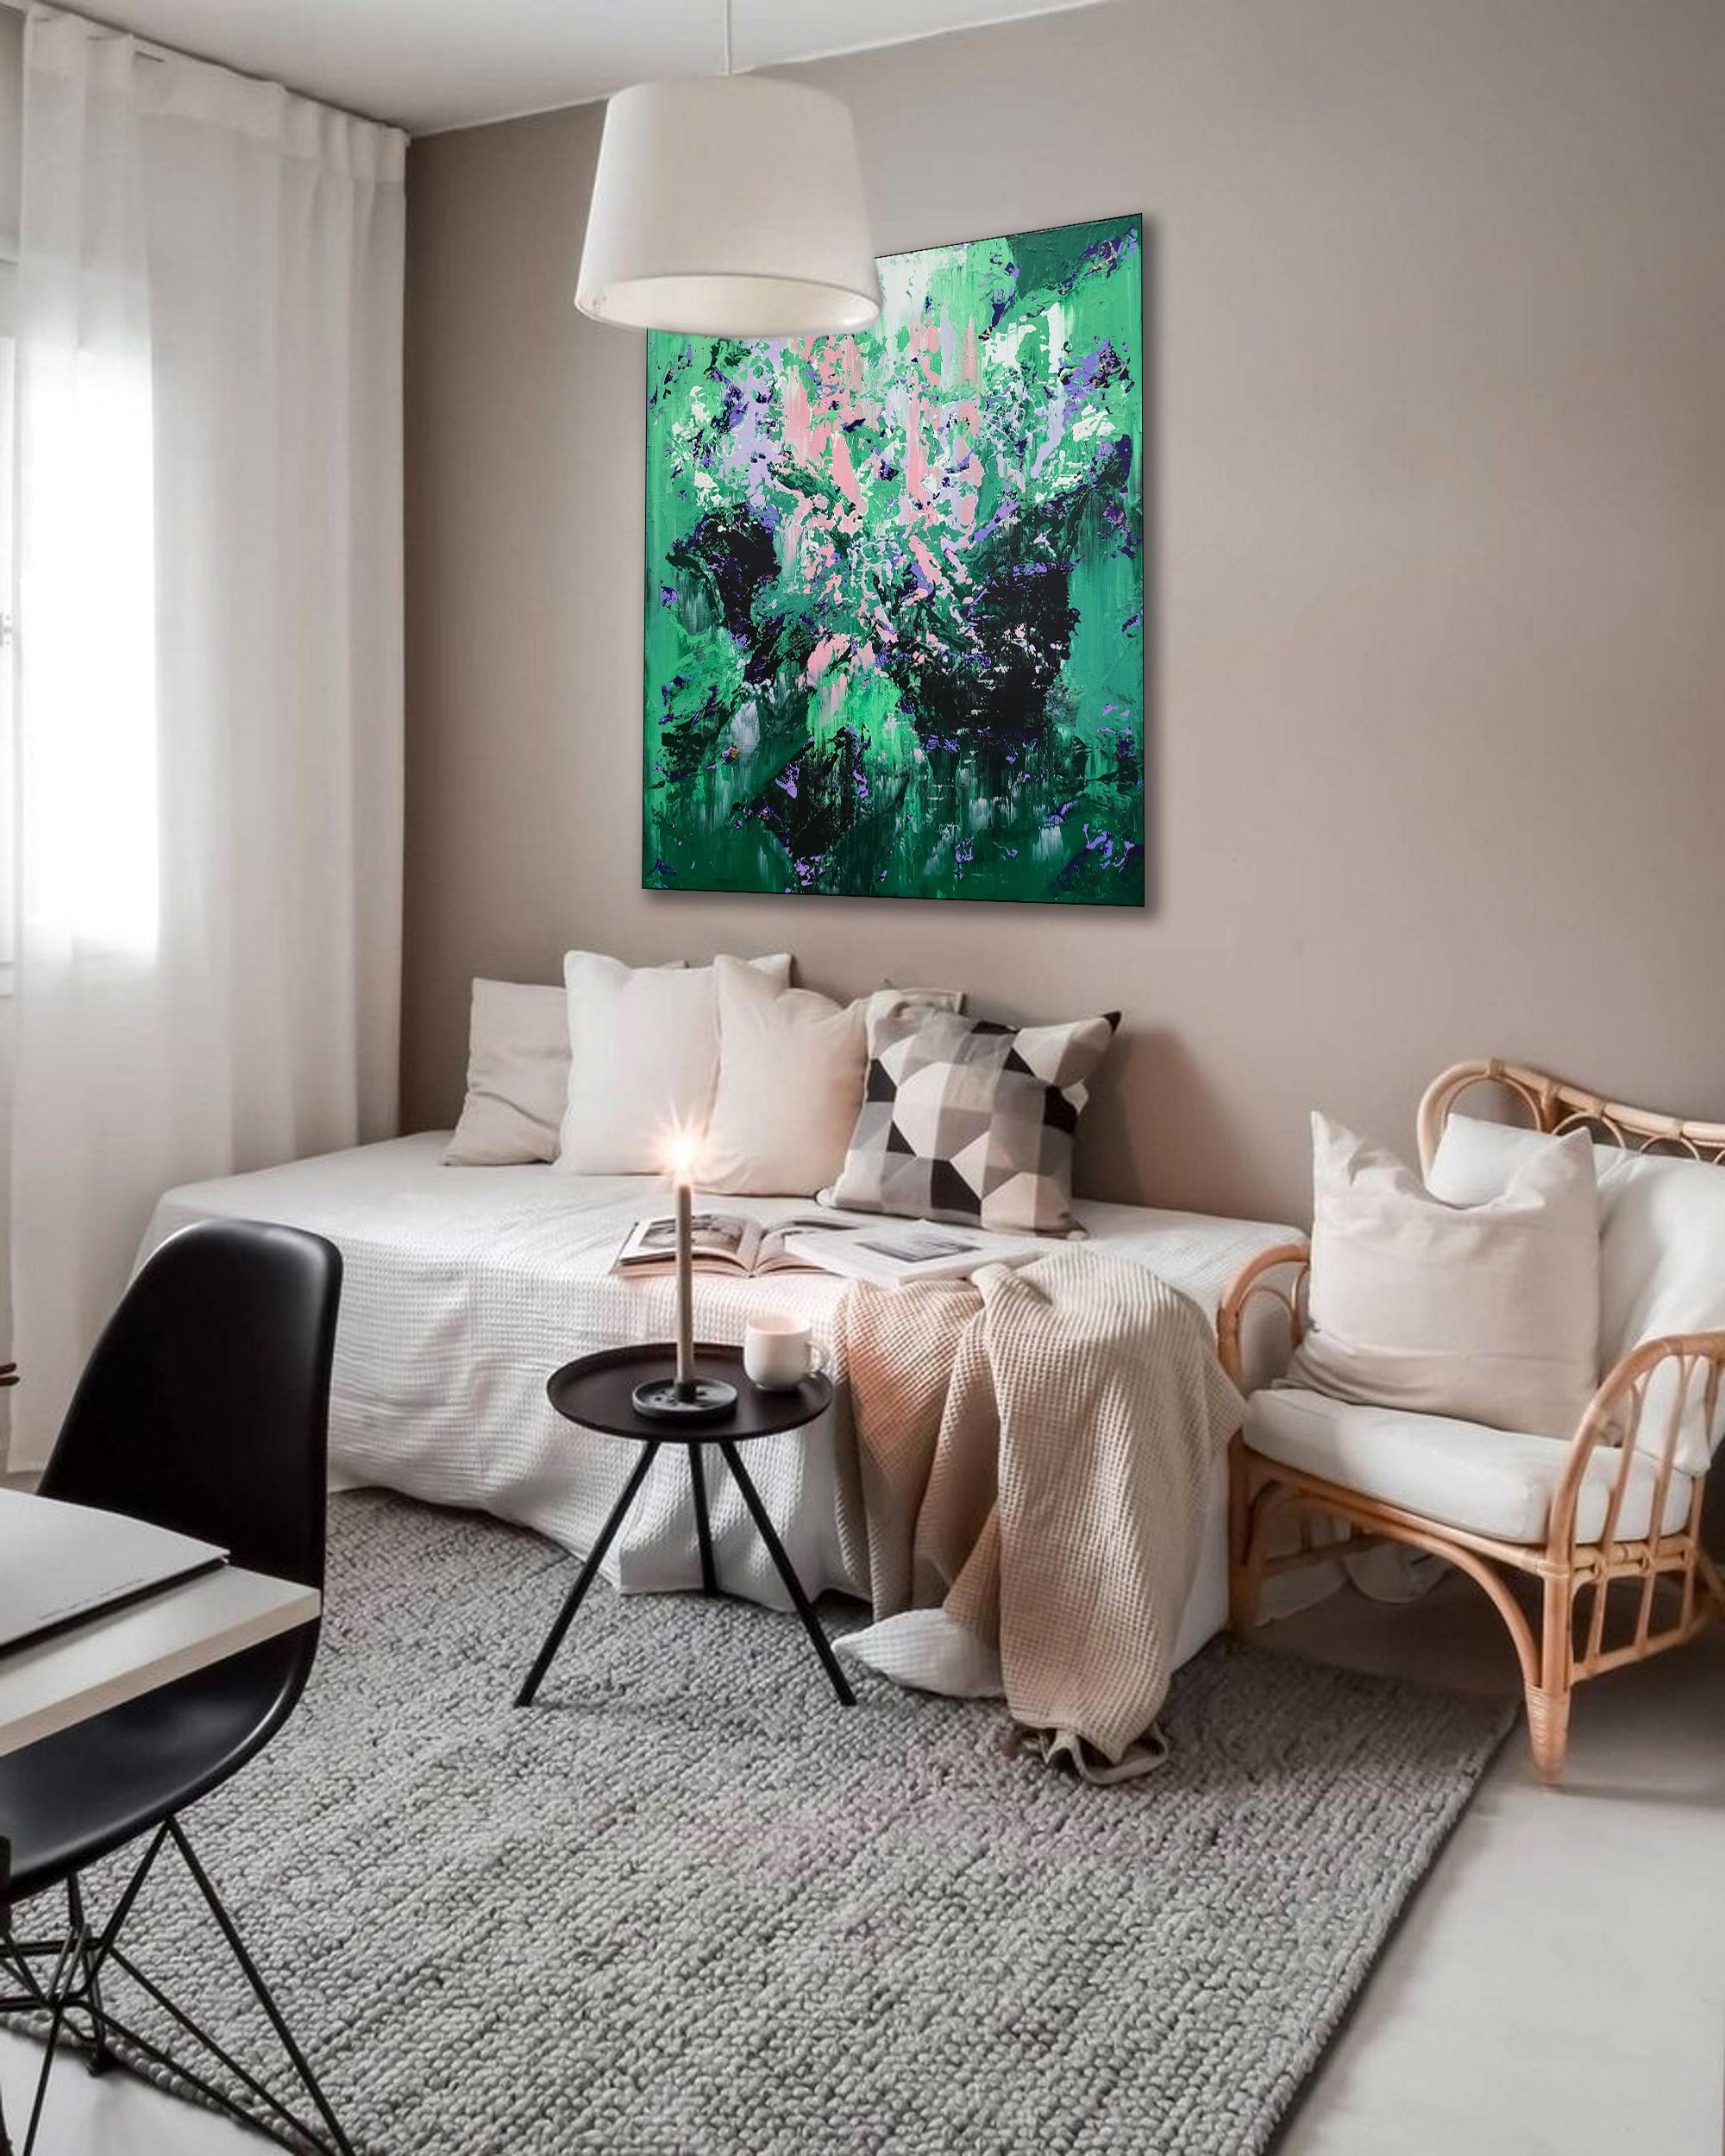 There’s something different about the homes of creative people. They like to surround themselves with inspiring things, from unique tablecloths to the incredible paintings on the walls.
Alex Senchenko’s - Abstract 2352 - can give your home that